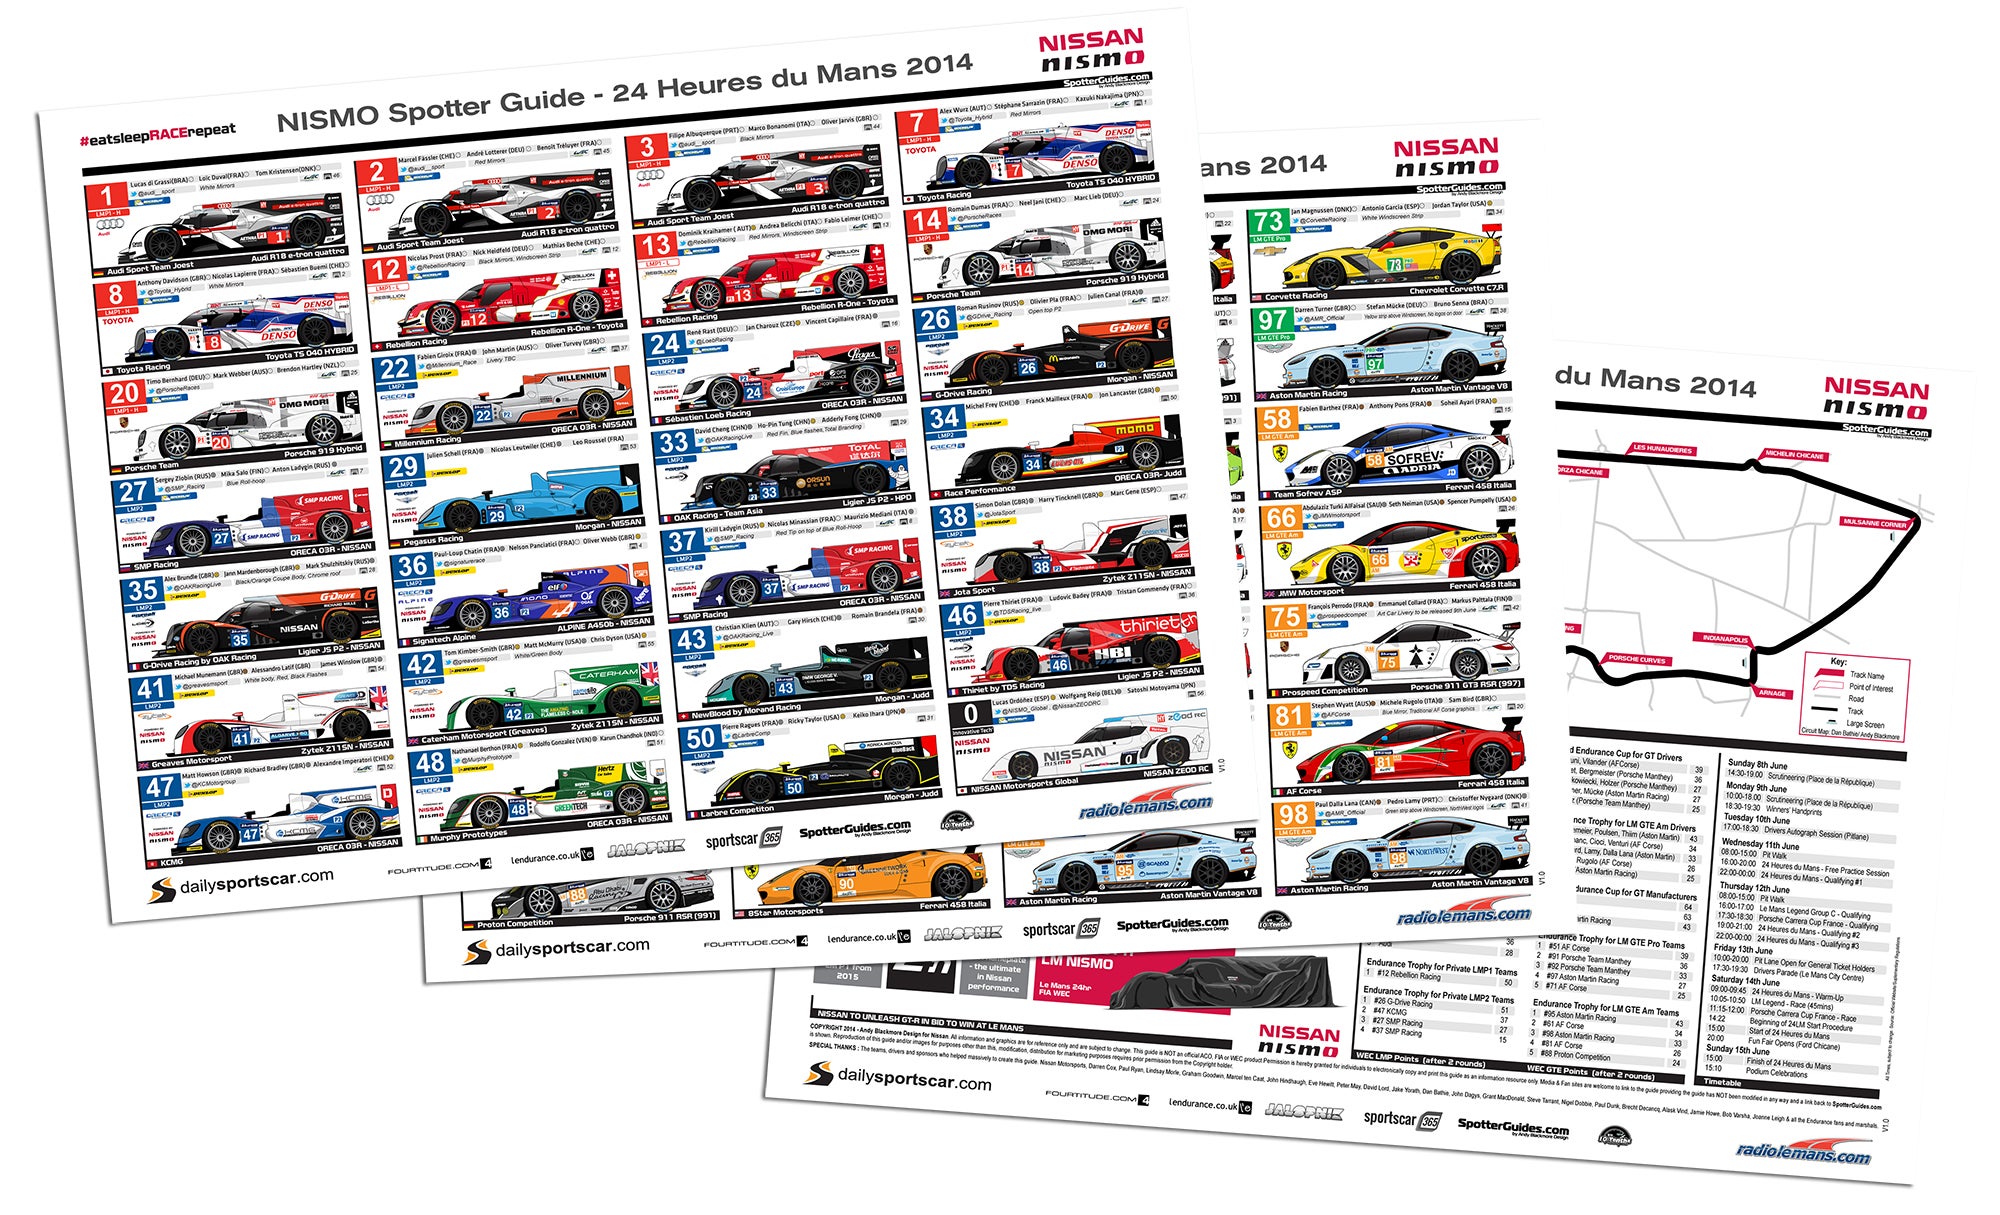 NISMO 24 Hours of Le Mans Spotter Guide live and updated (again)!